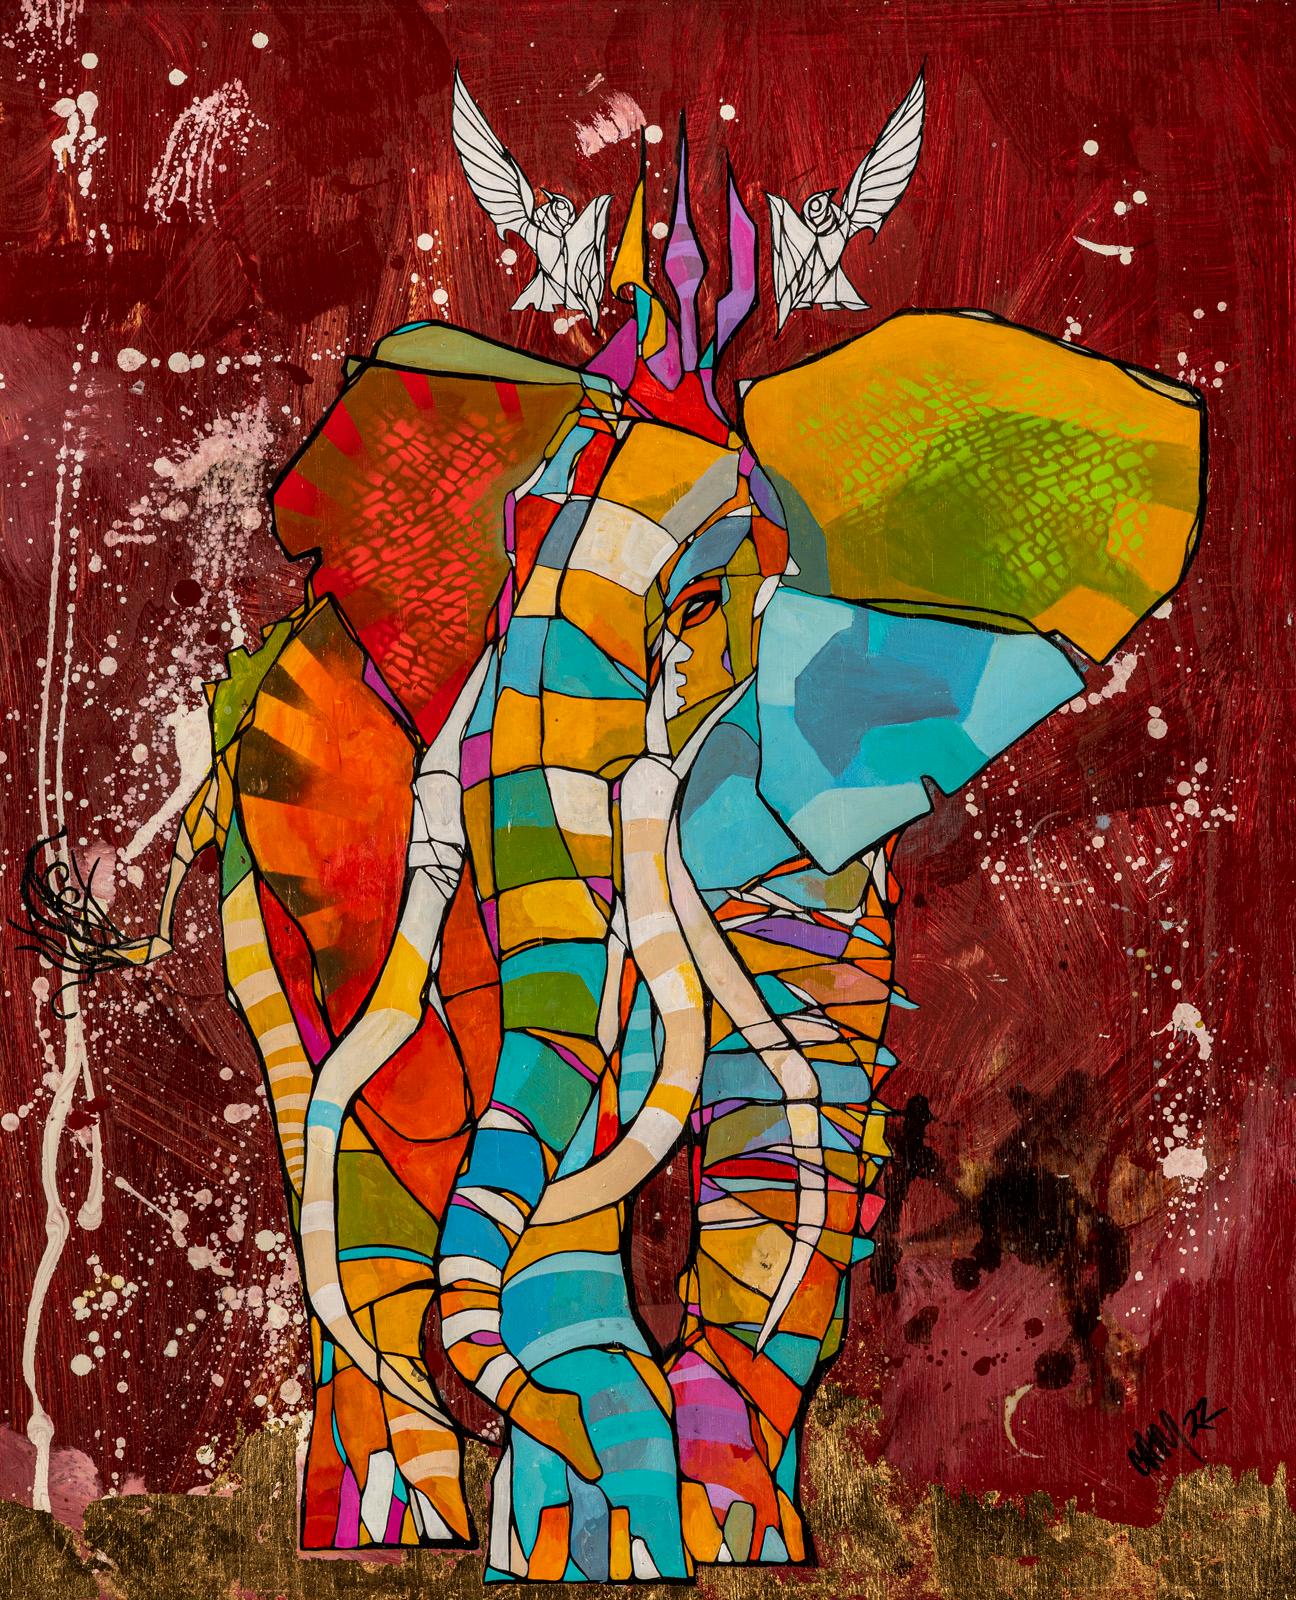 "Mindful Journey"- Vibrant, Colorful Elephant Mixed Media Painting on Wood Panel - Mixed Media Art by CAM (Craig Anthony Miller)